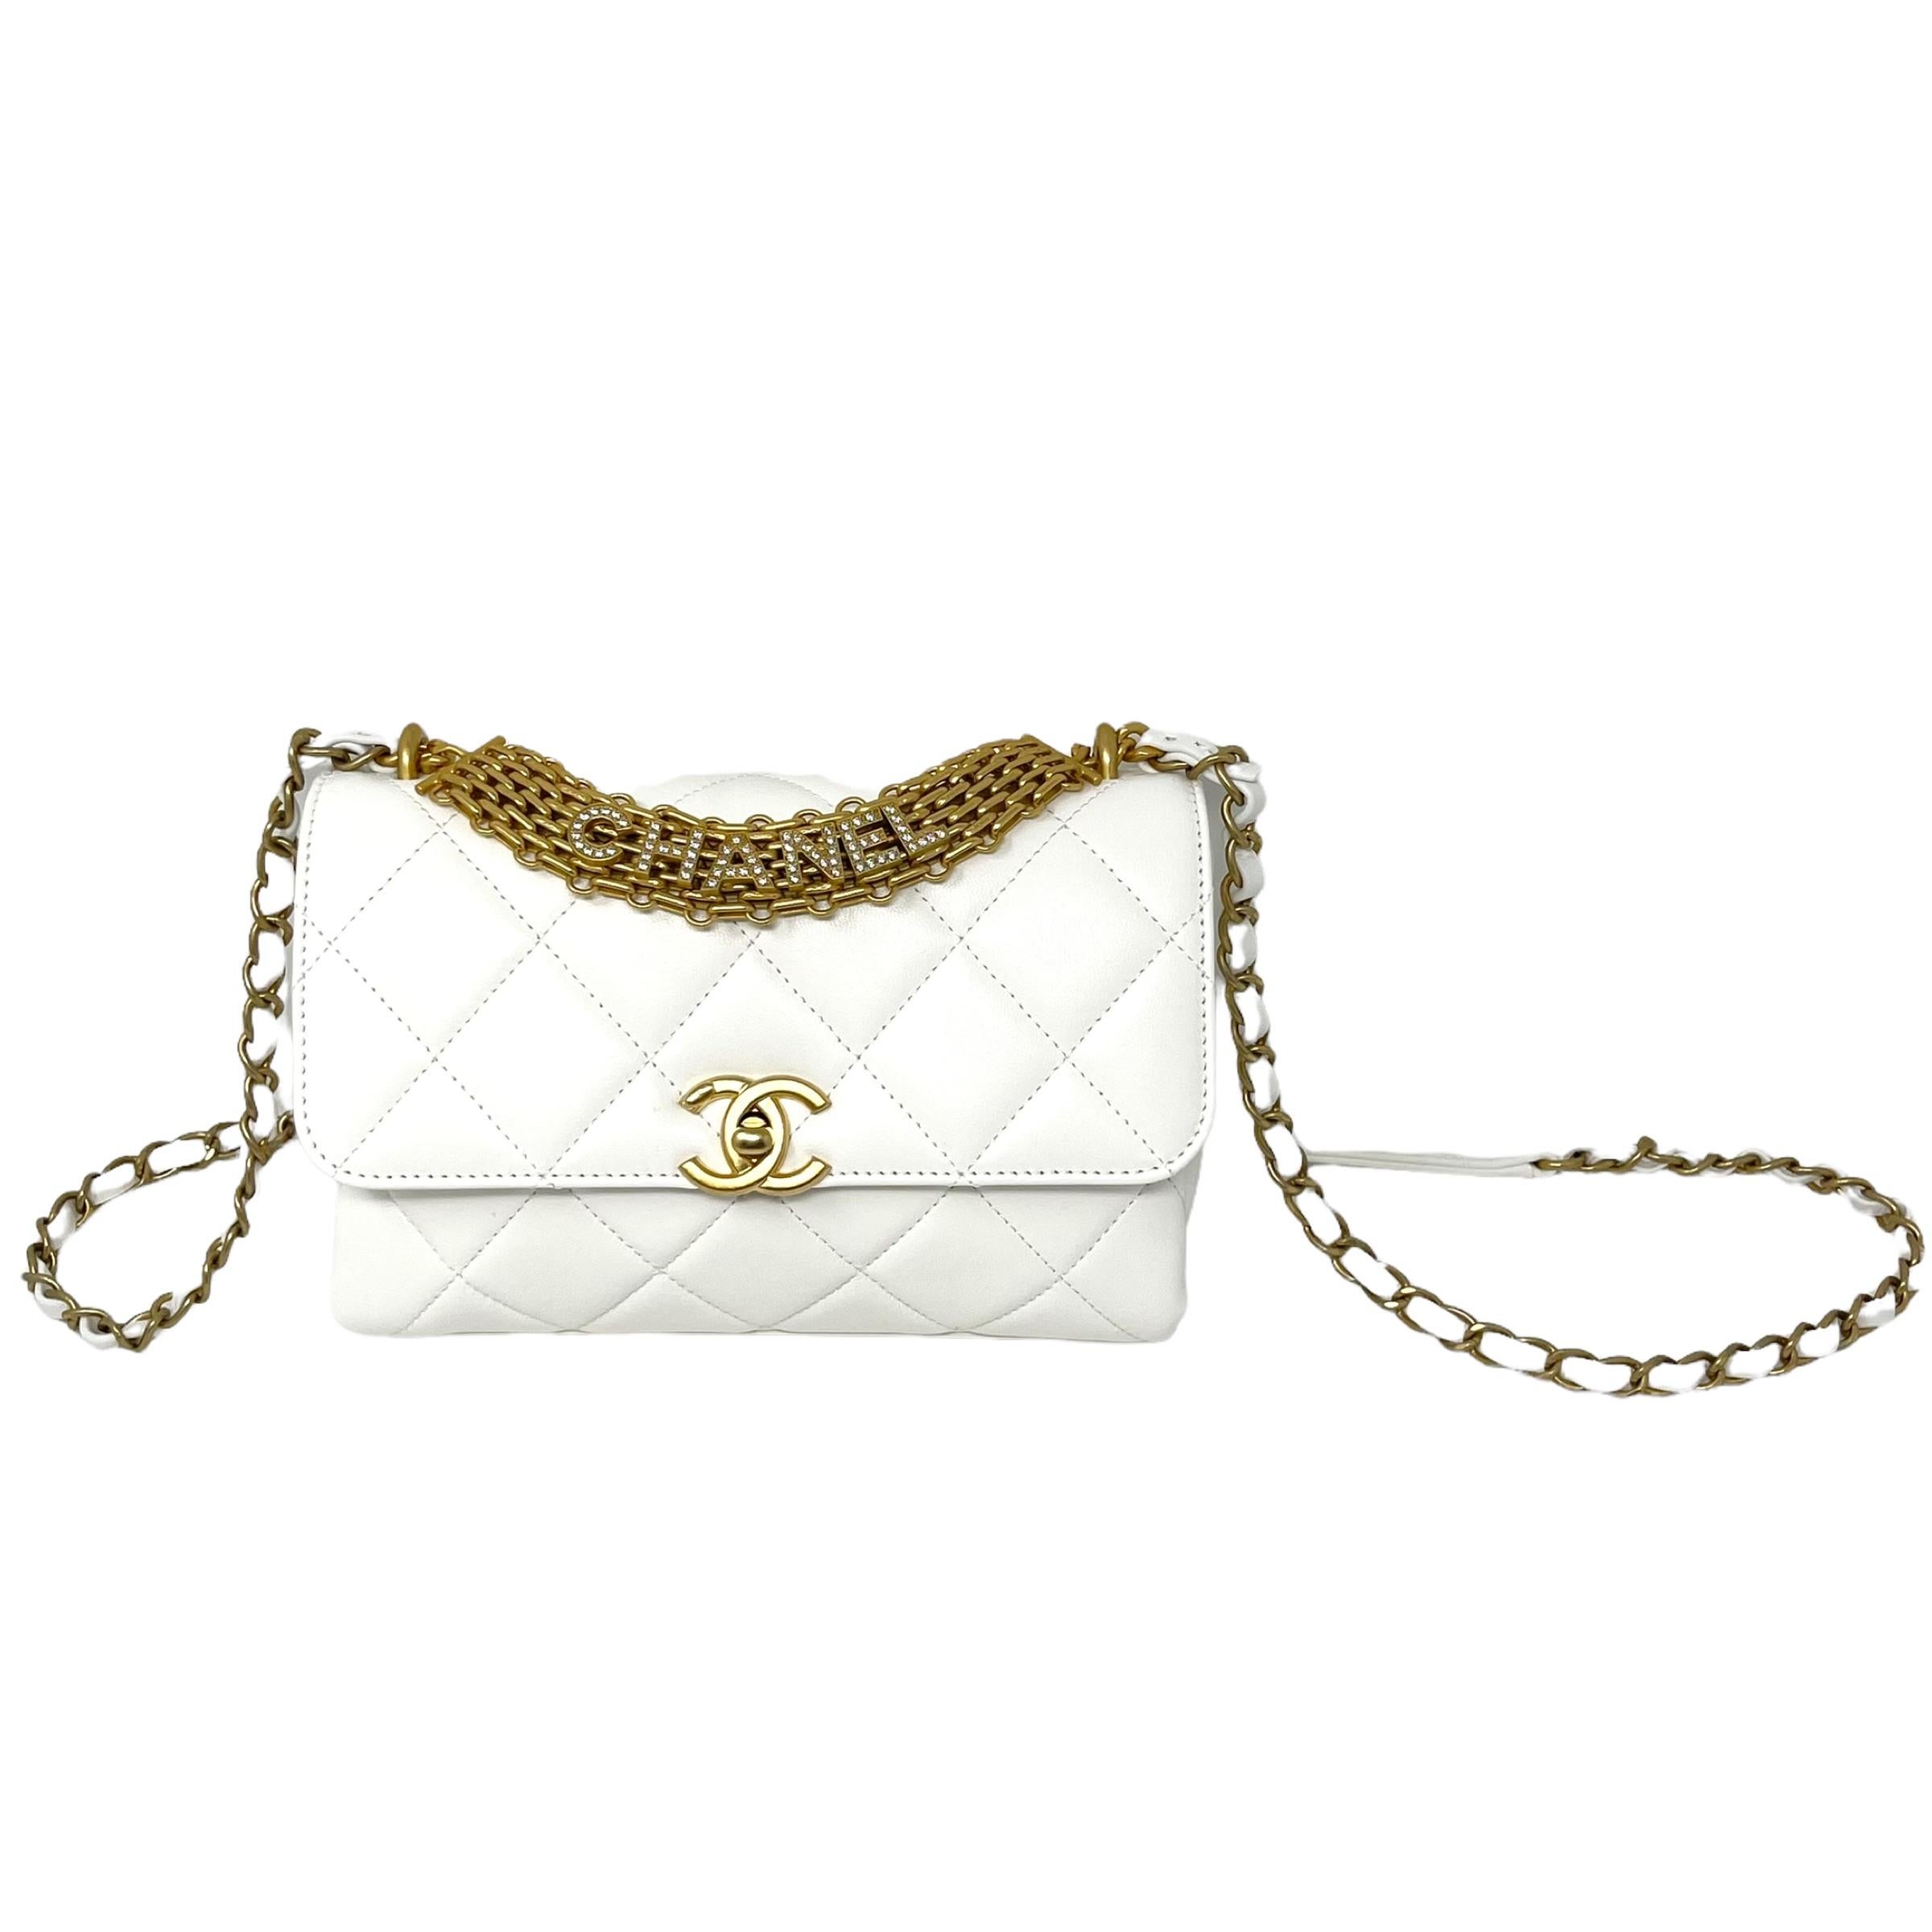 NEW Chanel White Small Flap Bag Quilted Leather Crossbody Bag For Sale 2